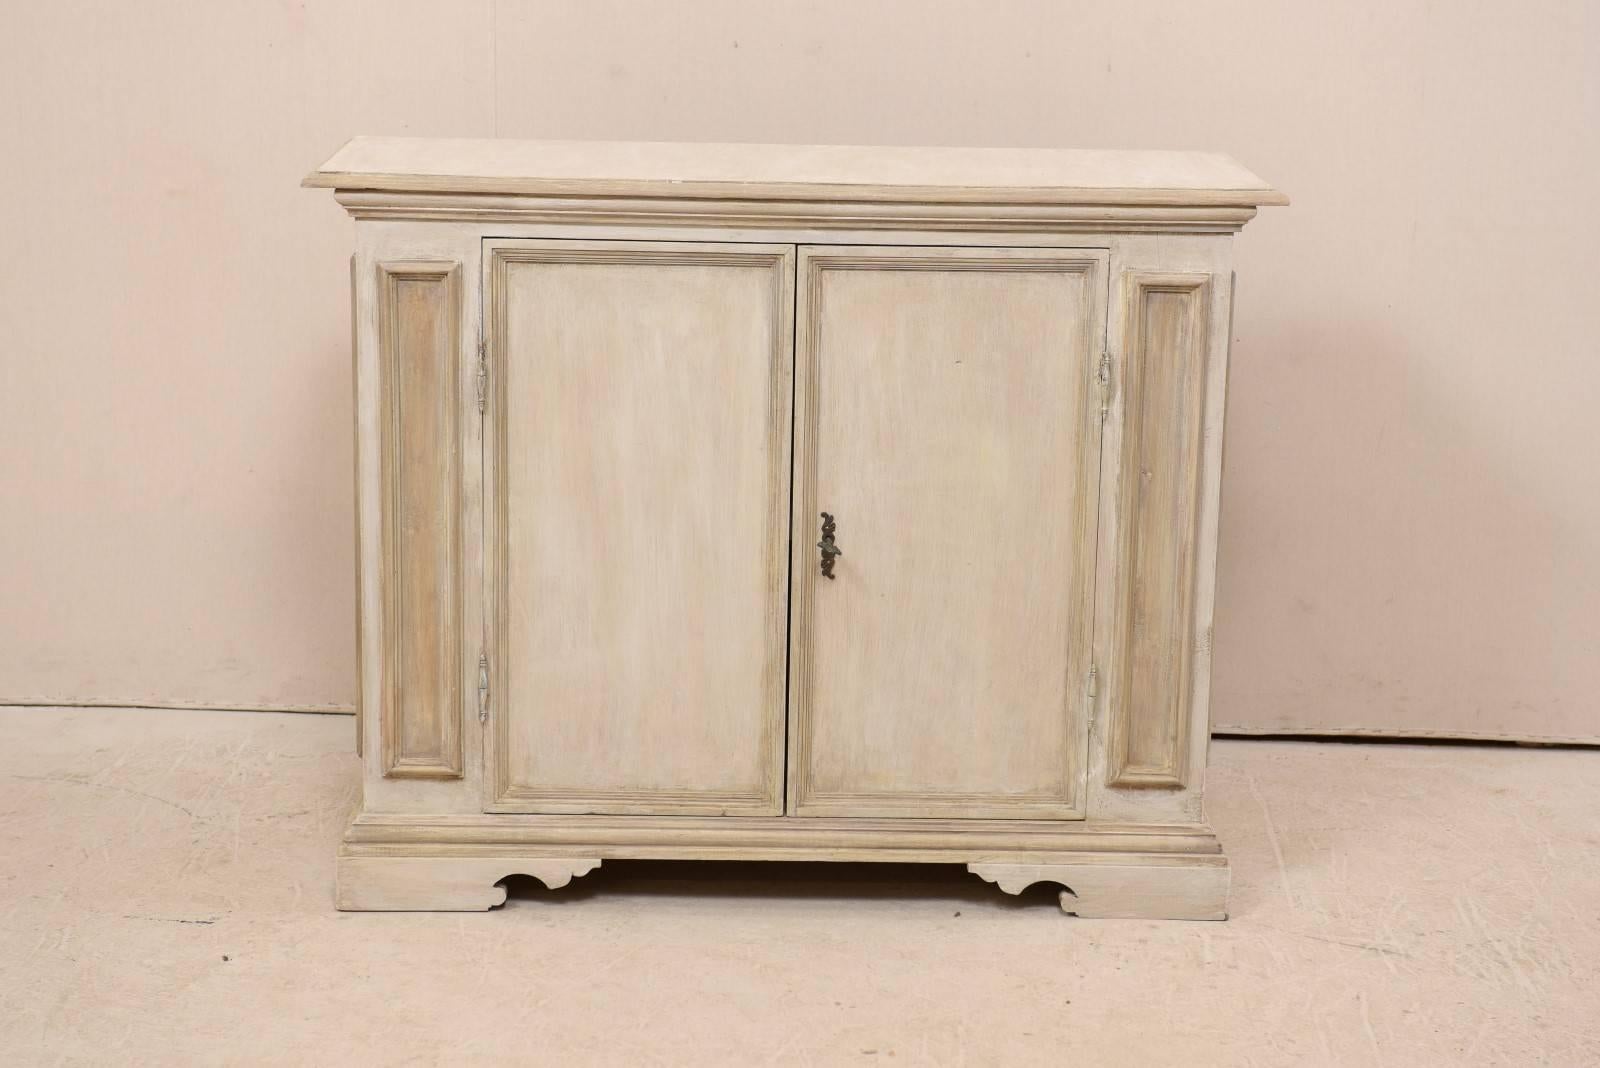 An Italian painted wood cabinet from the mid-20th century. This vintage Italian cabinet features two recessed panel doors flanked with two vertically recessed decorative panels. The recessed panel design is carried through on either cabinet side,